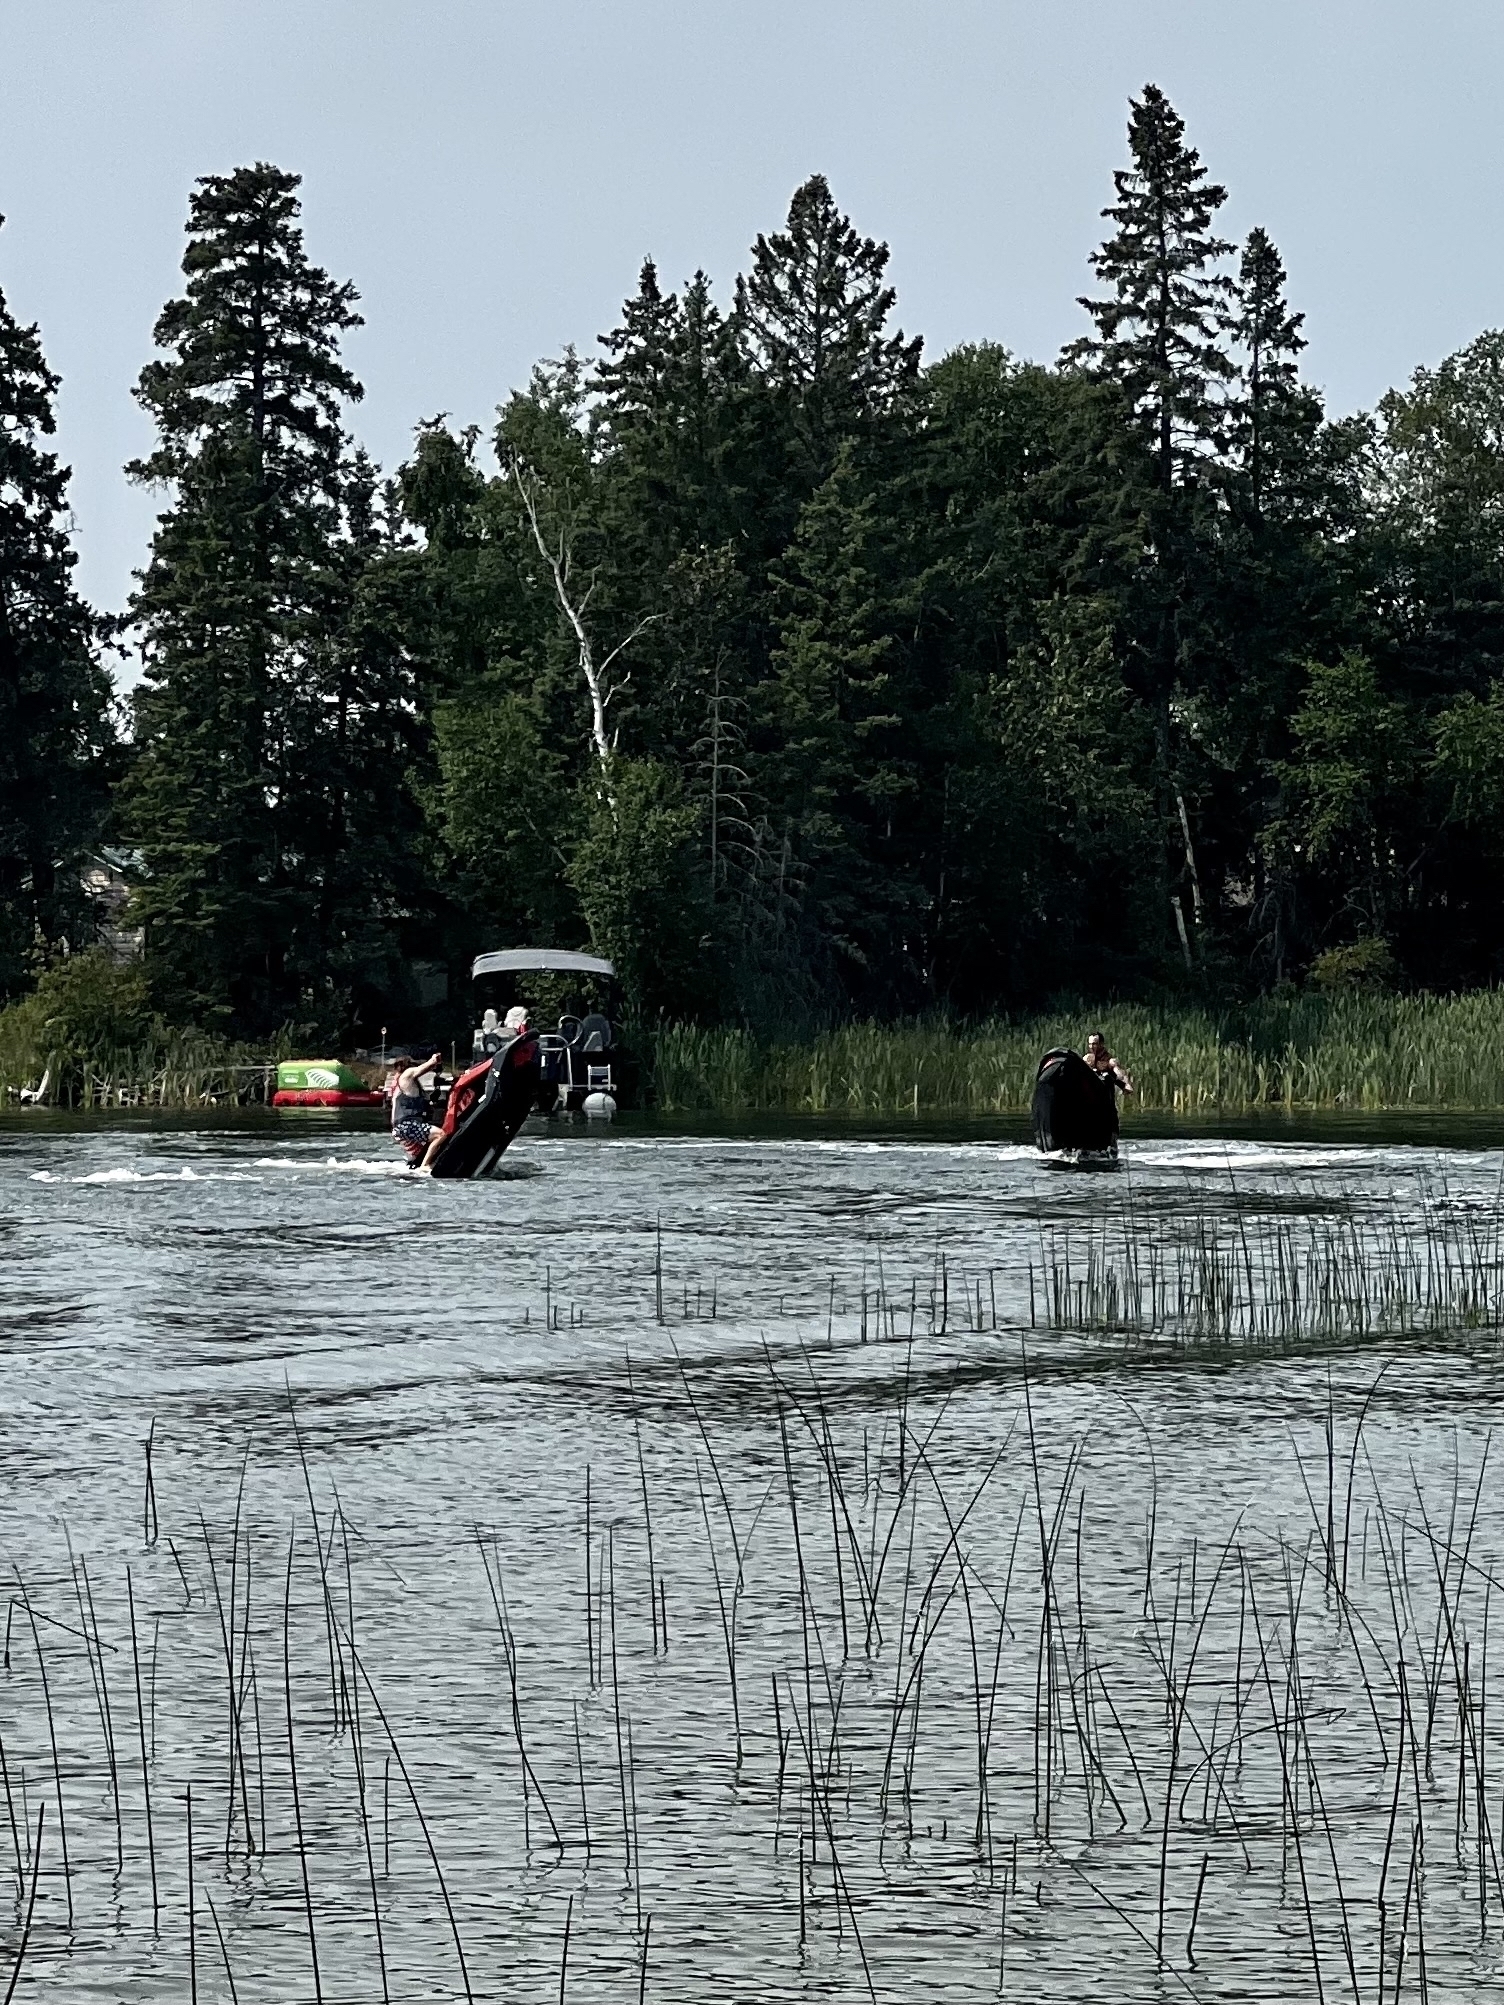 Two dudes are each driving some form of jetski in shallow water 